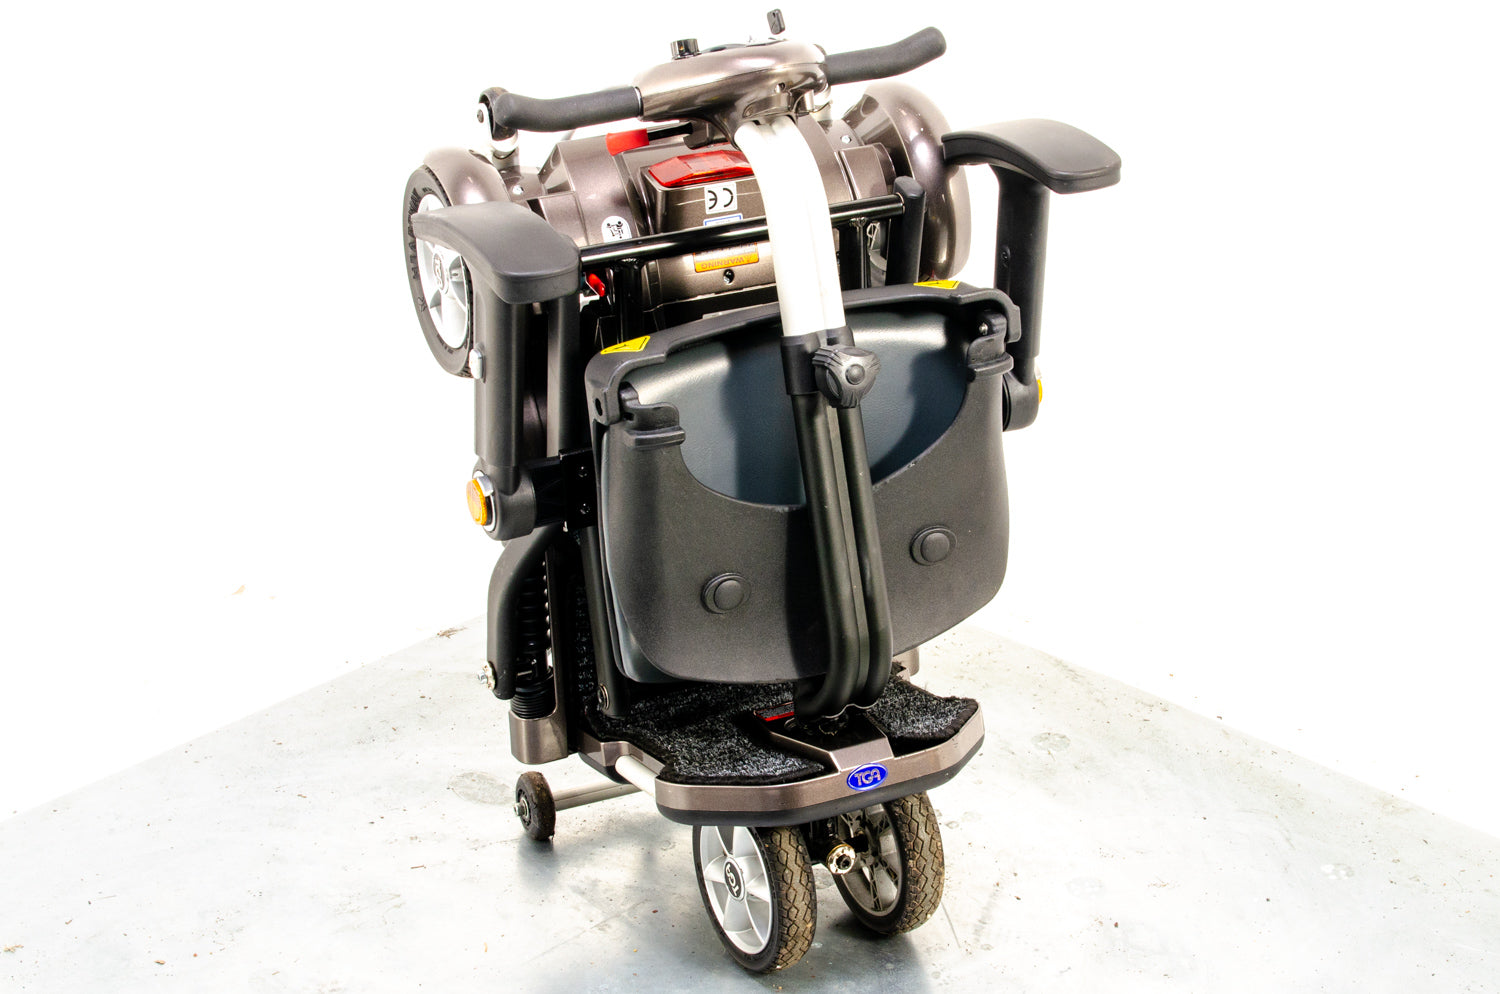 TGA Minimo Used Mobility Scooter Small Compact Folding Travel Lithium Battery Lightweight 13332